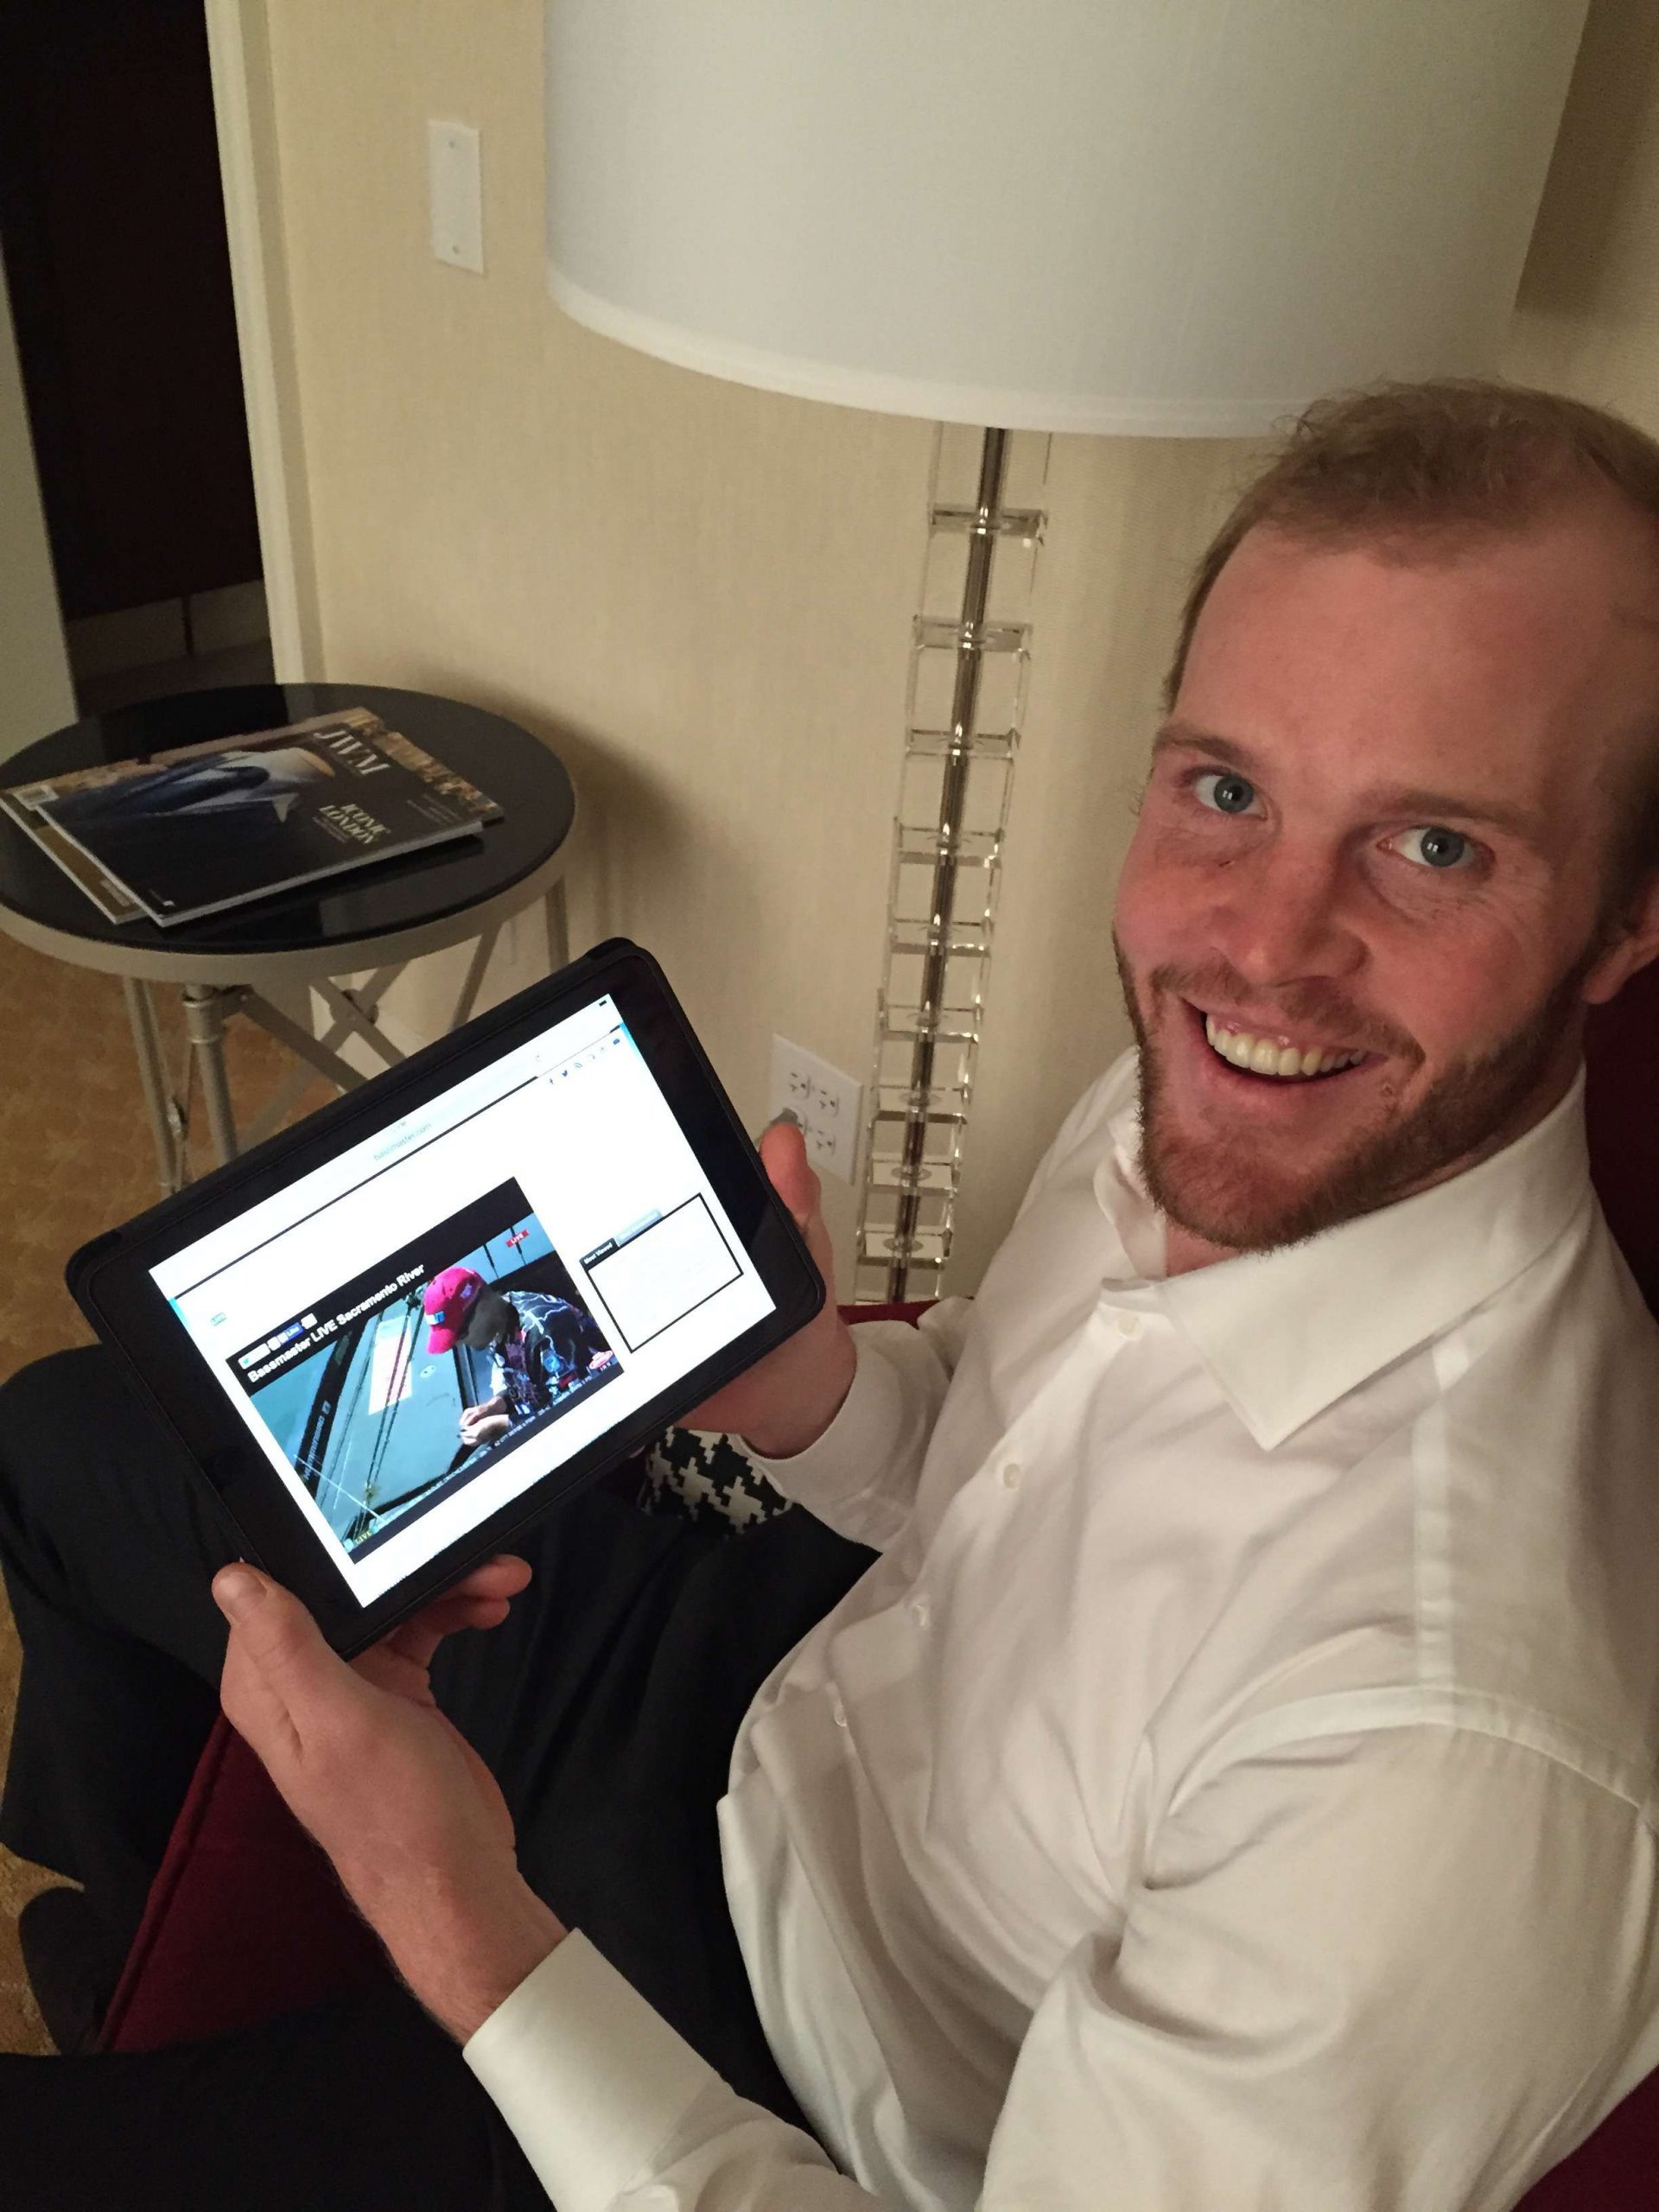 Oh, wait -- there was one more celebrity! Bryan Bickell, who plays for the Chicago Blackhawks in the NHL, watched Bassmaster LIVE in his suite before going out to play in a playoff game. And then the Blackhawks won! 